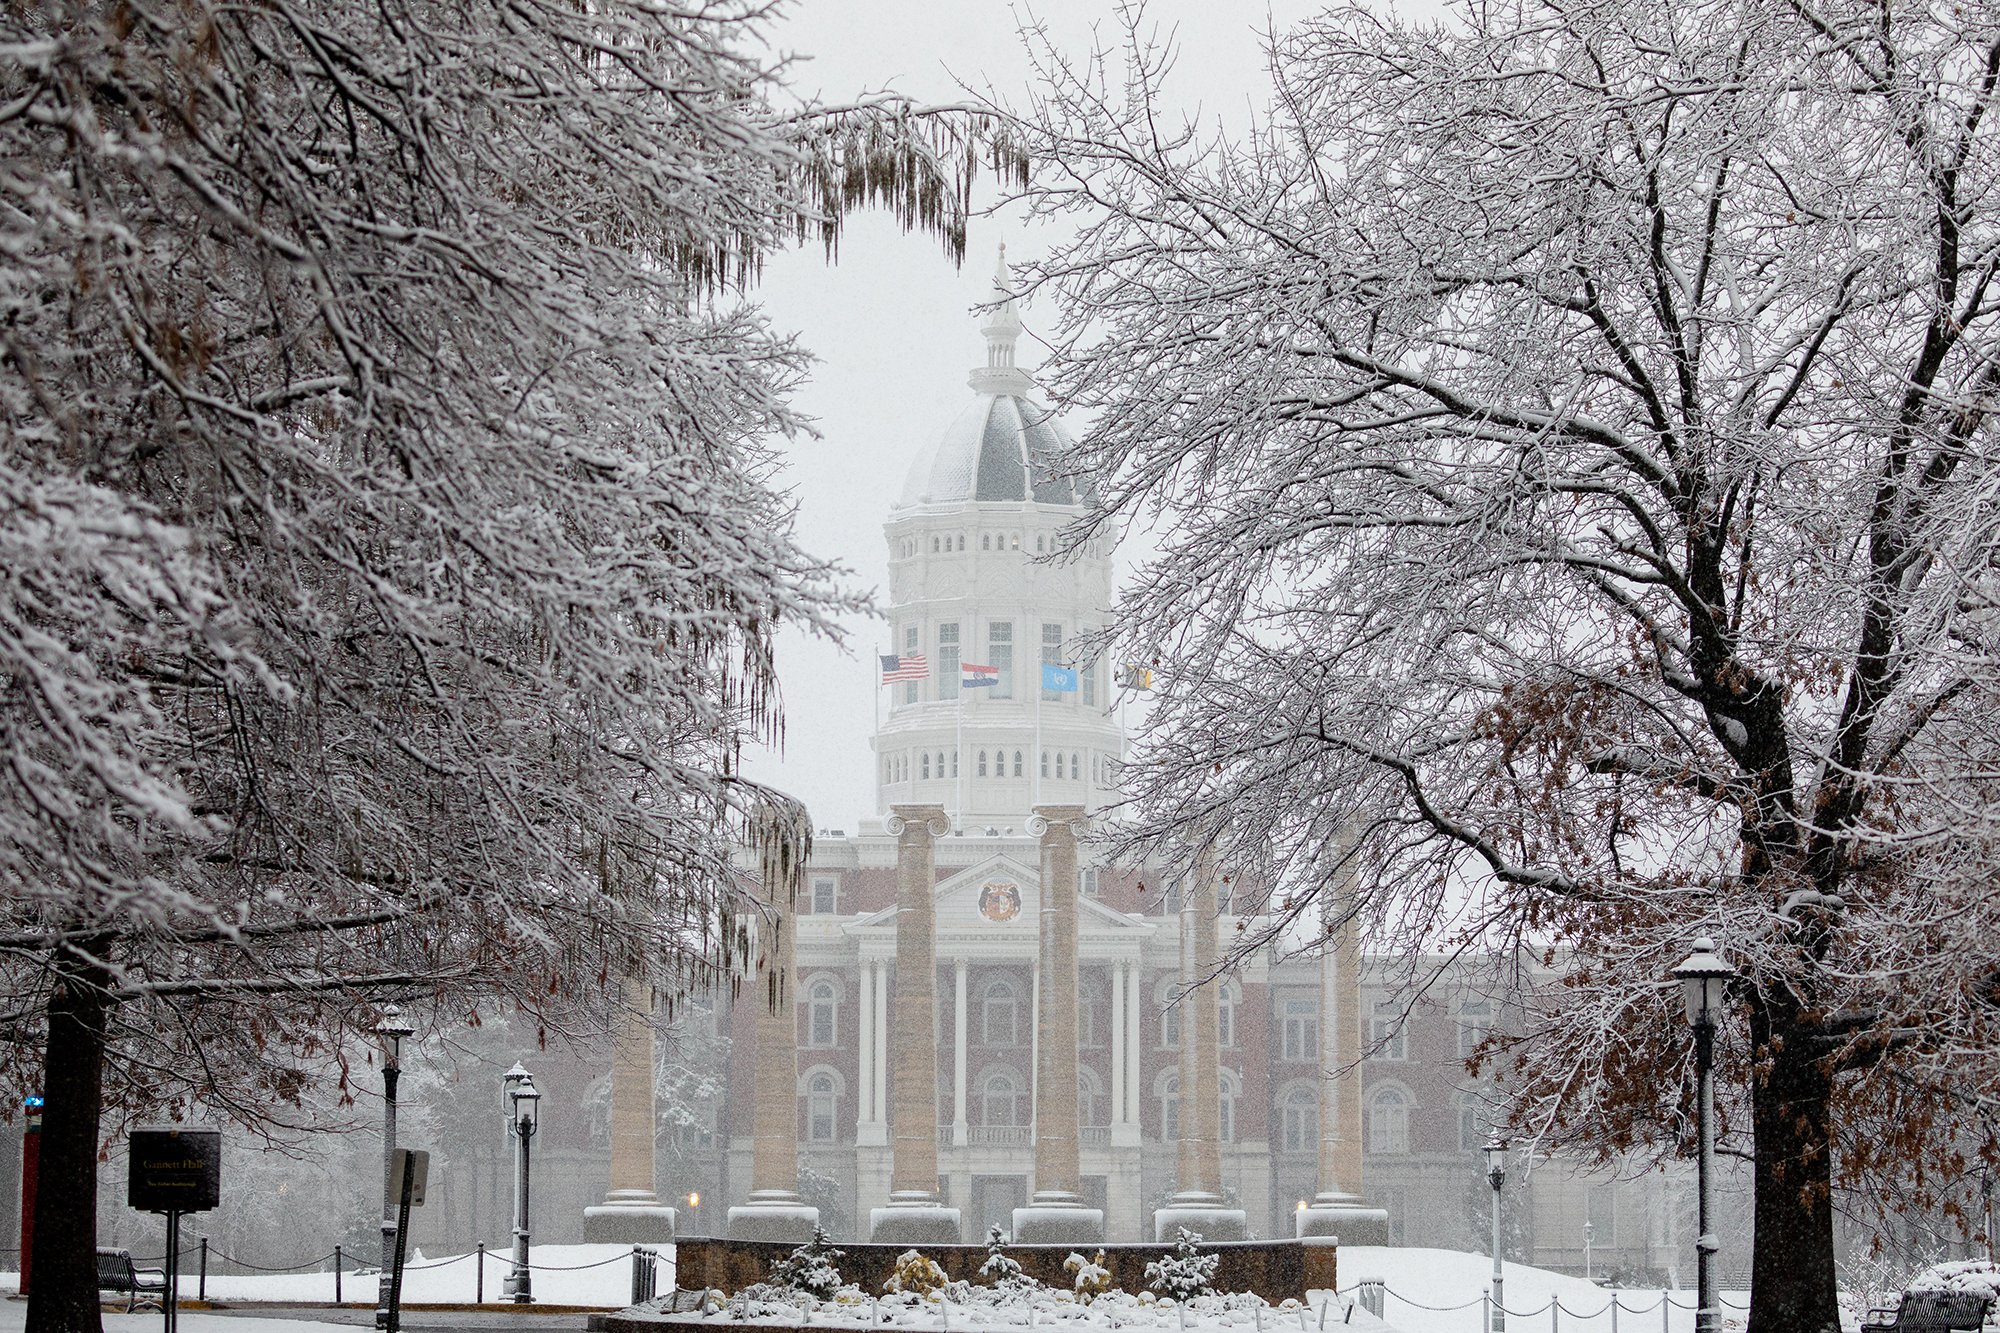 jesse hall with trees in front of it, covered in snow